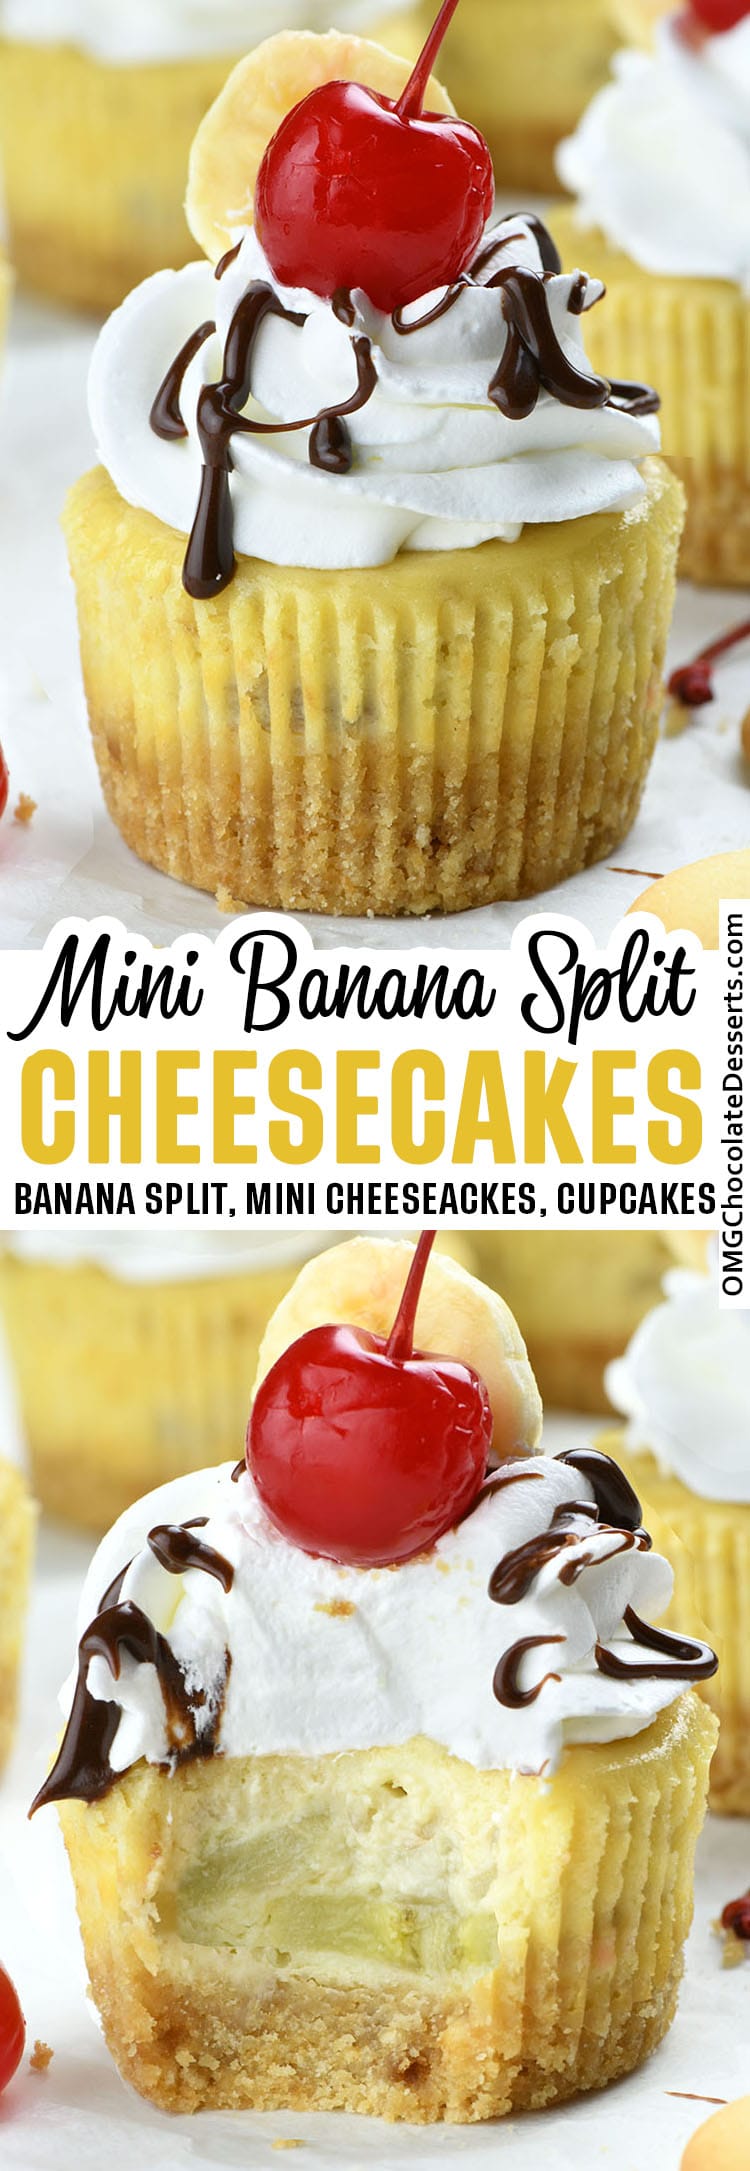 Tro different images of Mini Banana Split Cheesecakes with title text between them. 